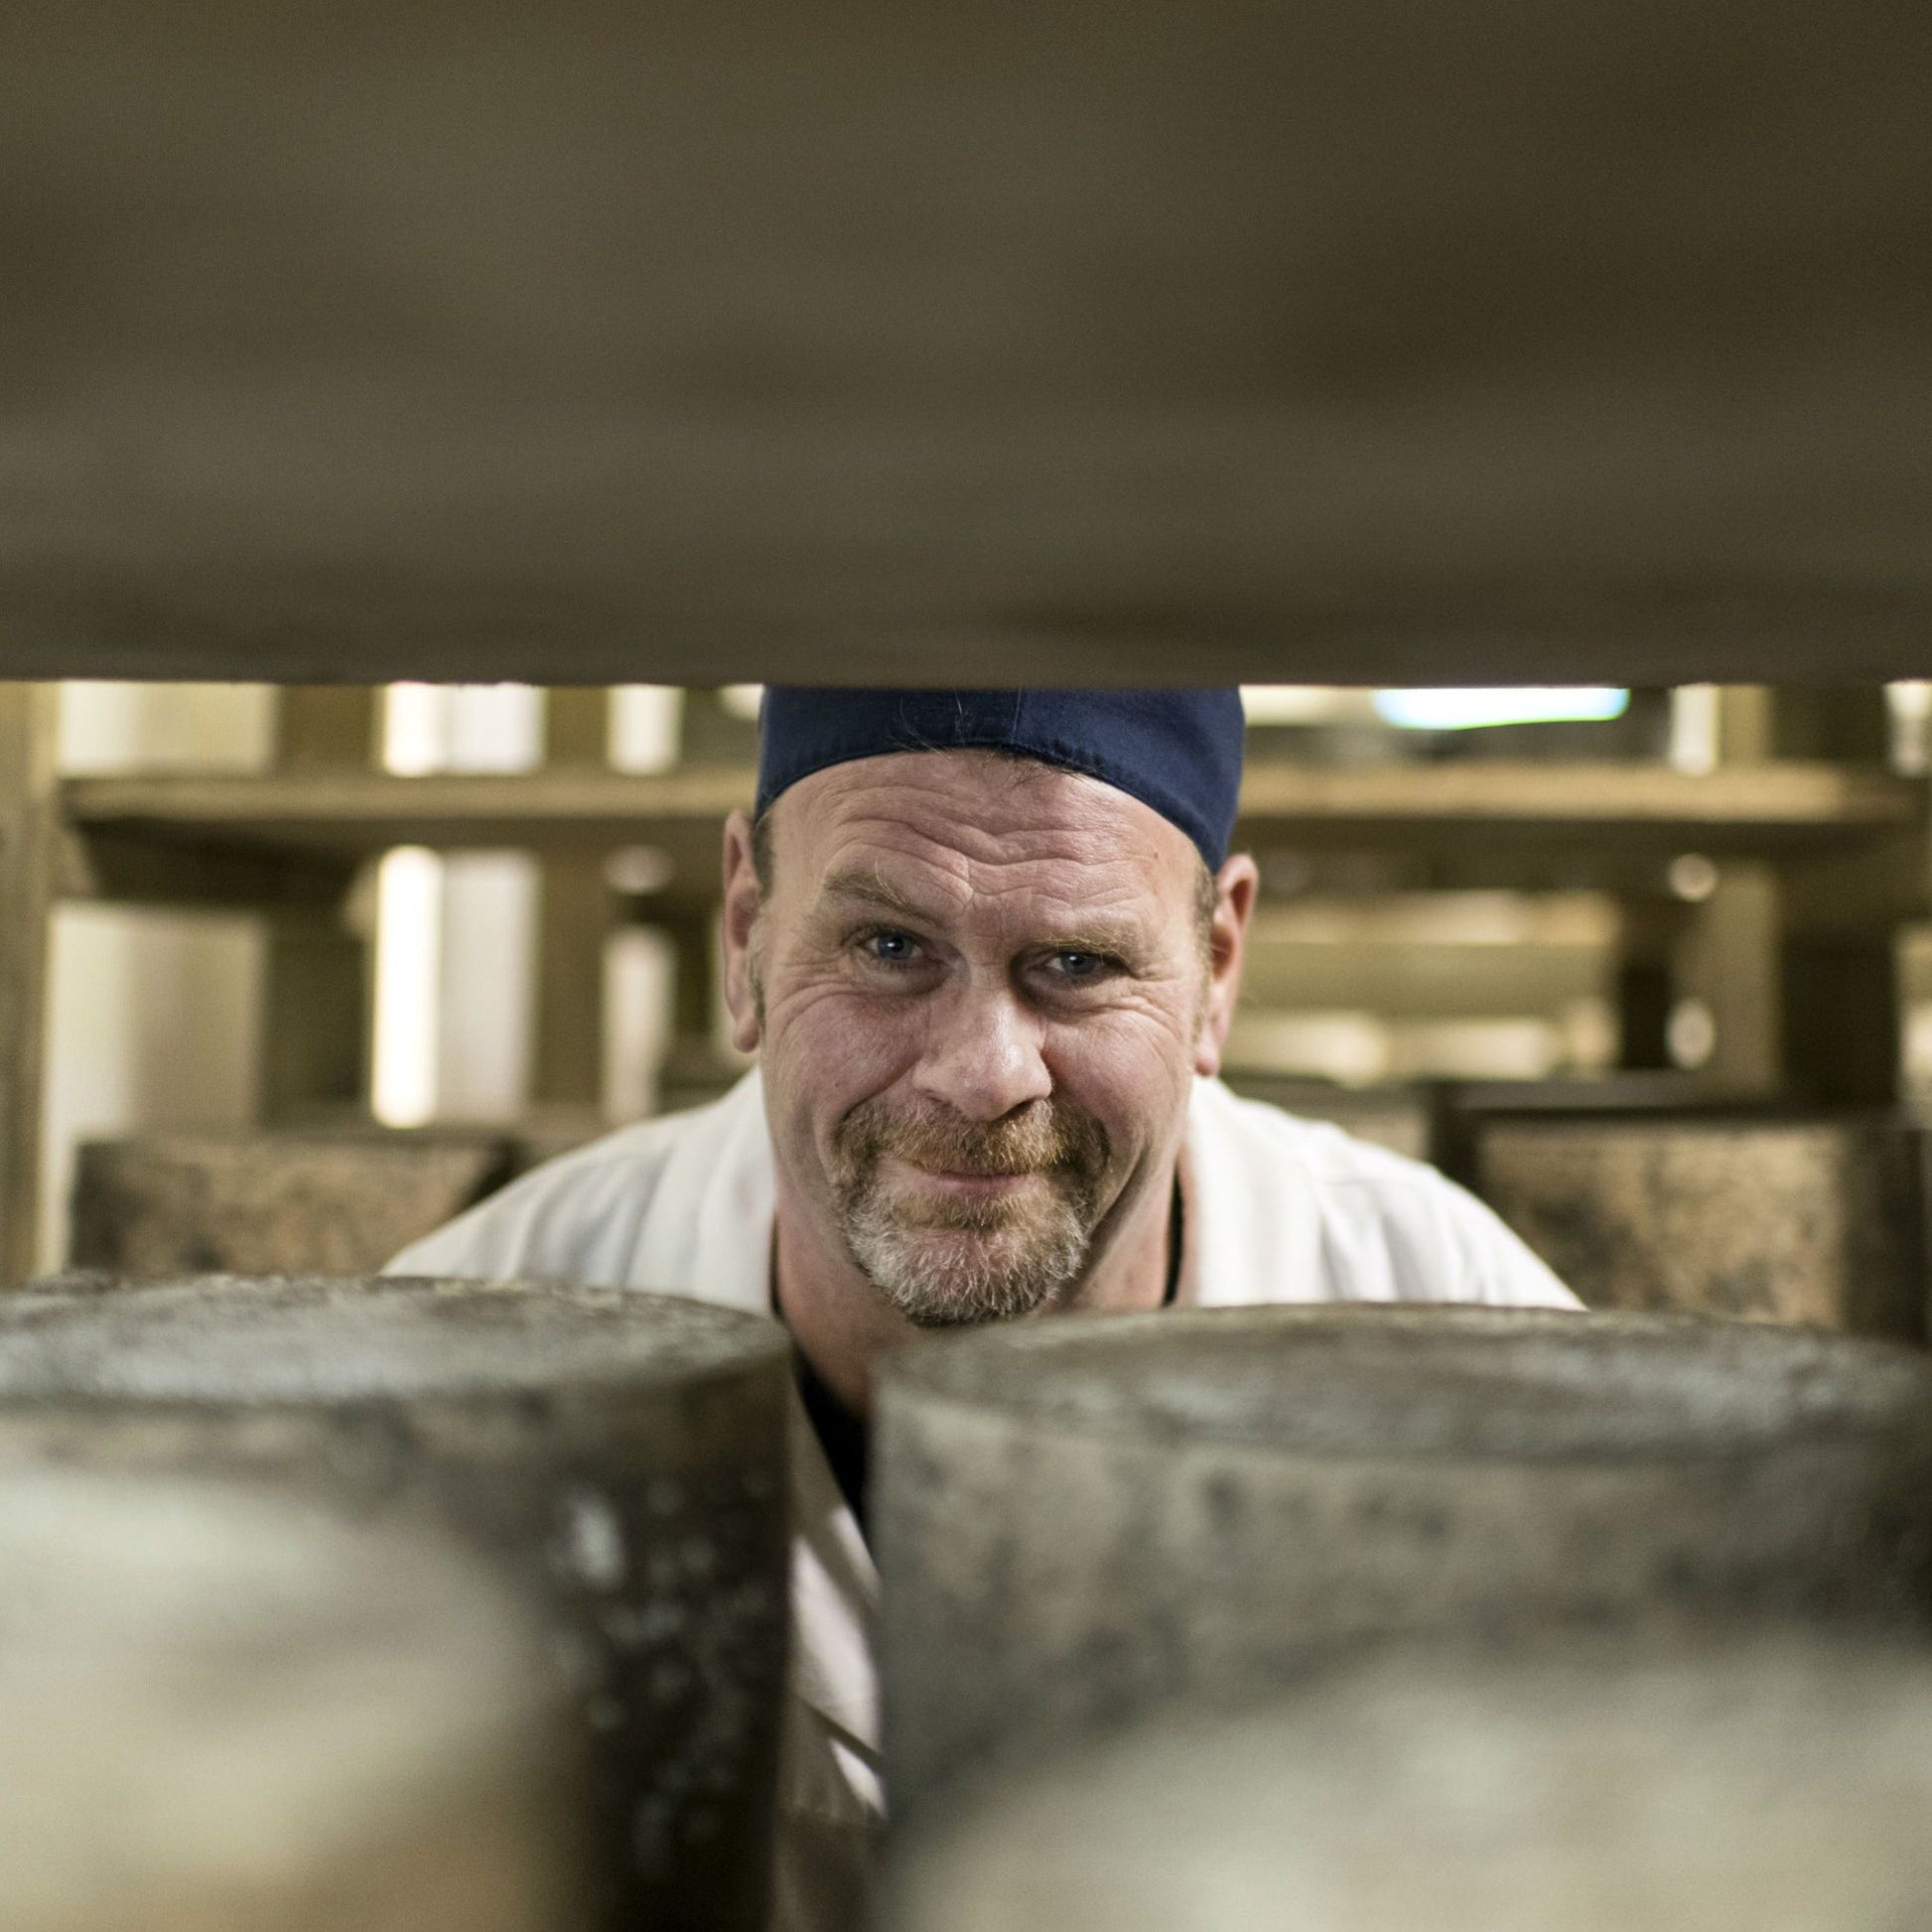 Goodwood's artisan cheesemaker, Bruce Rowan, in the cheese room at Goodwood.